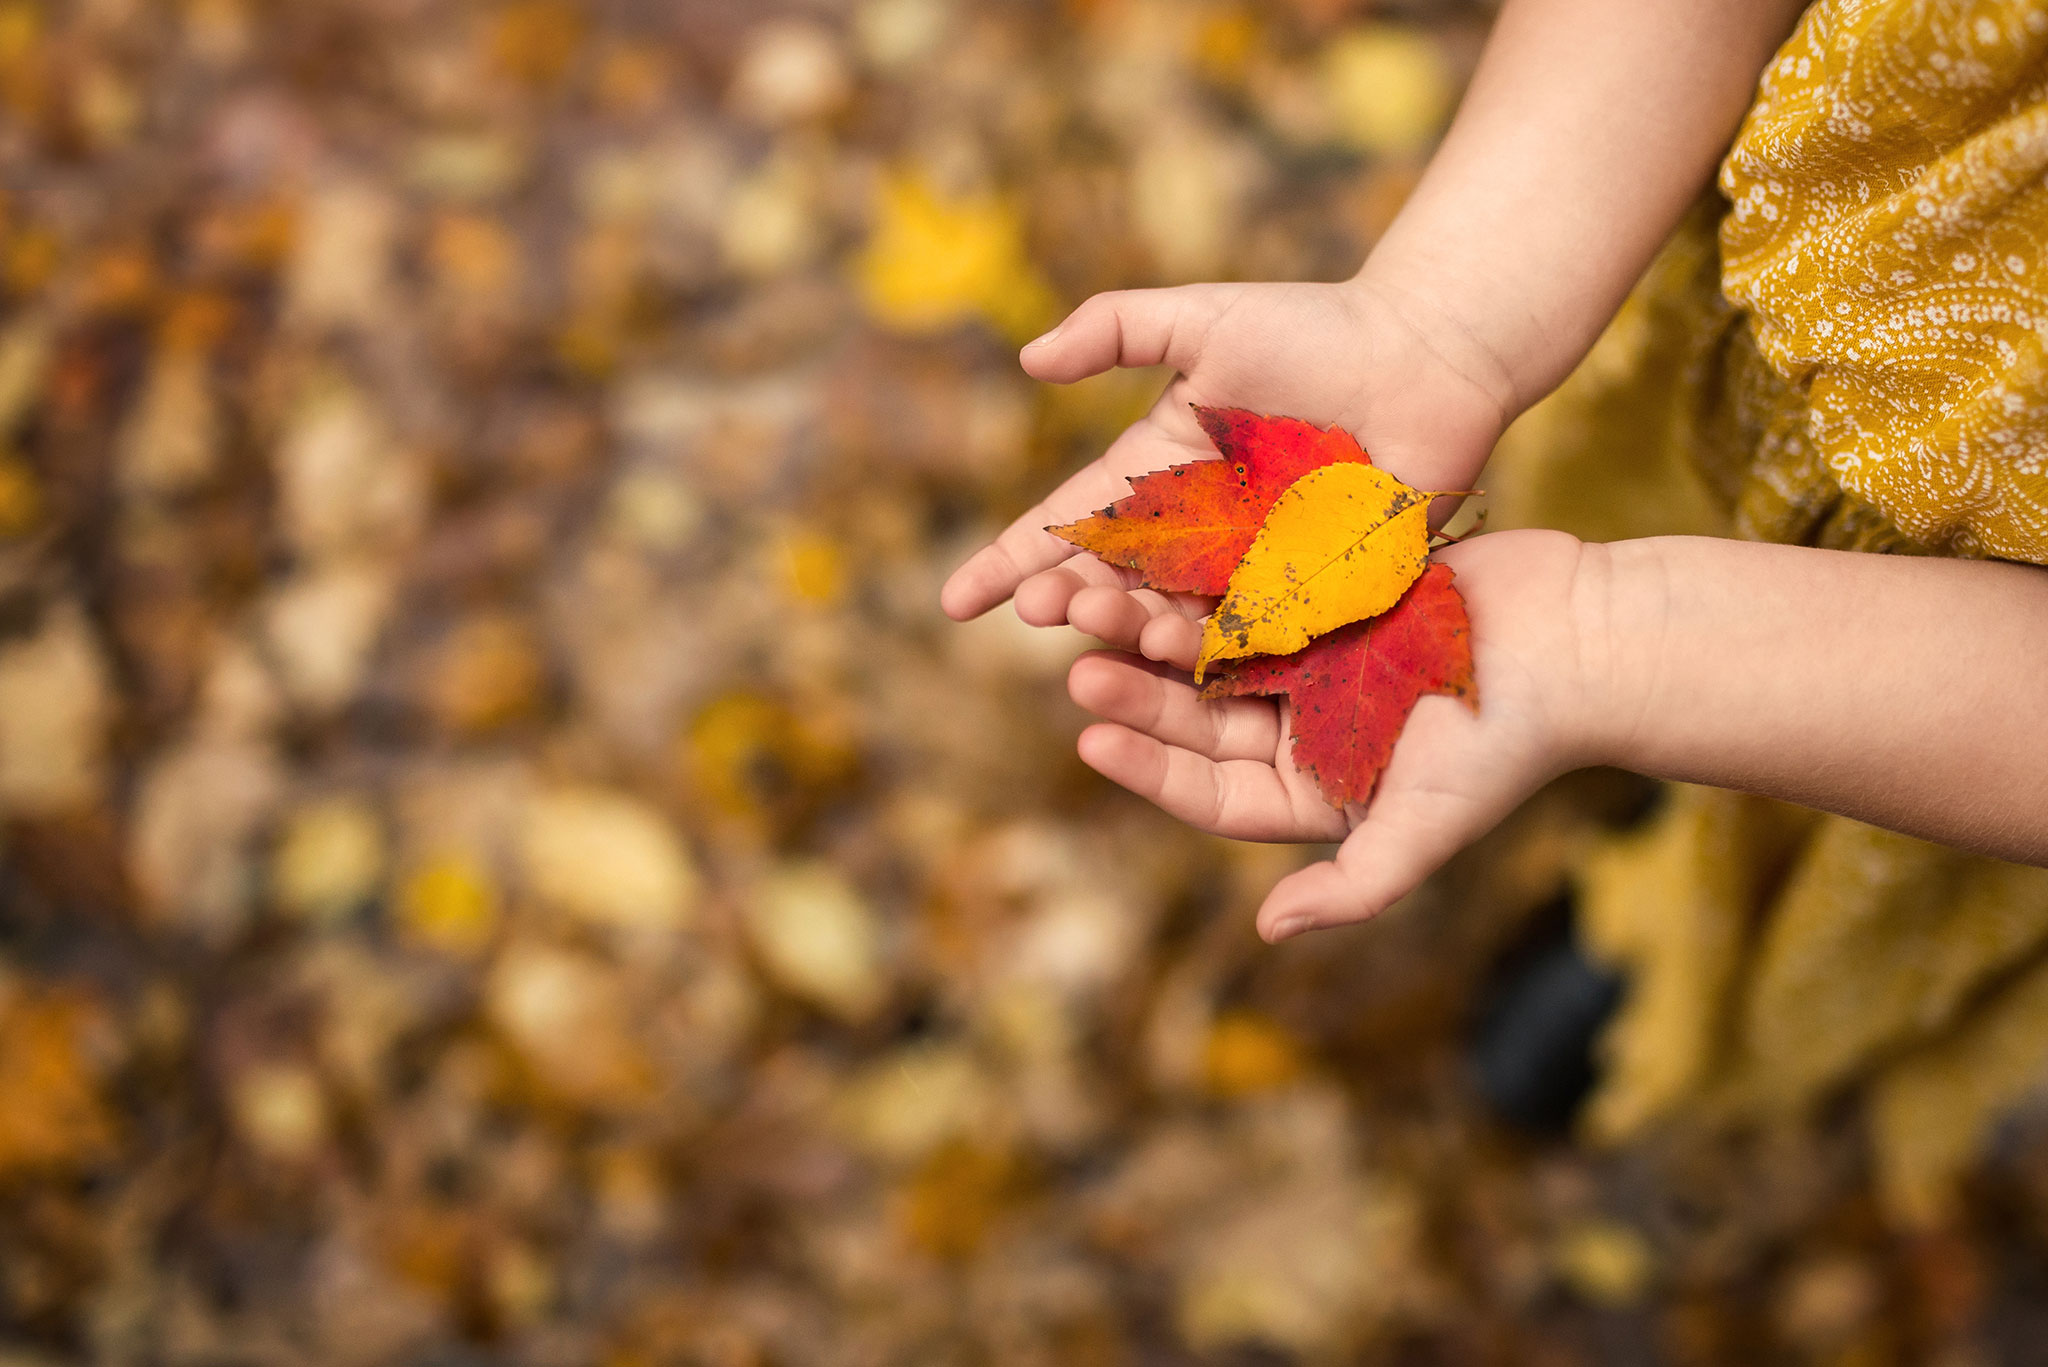 4 Tips for Capturing a Beautiful Autumn - Girl holding autumn leaves